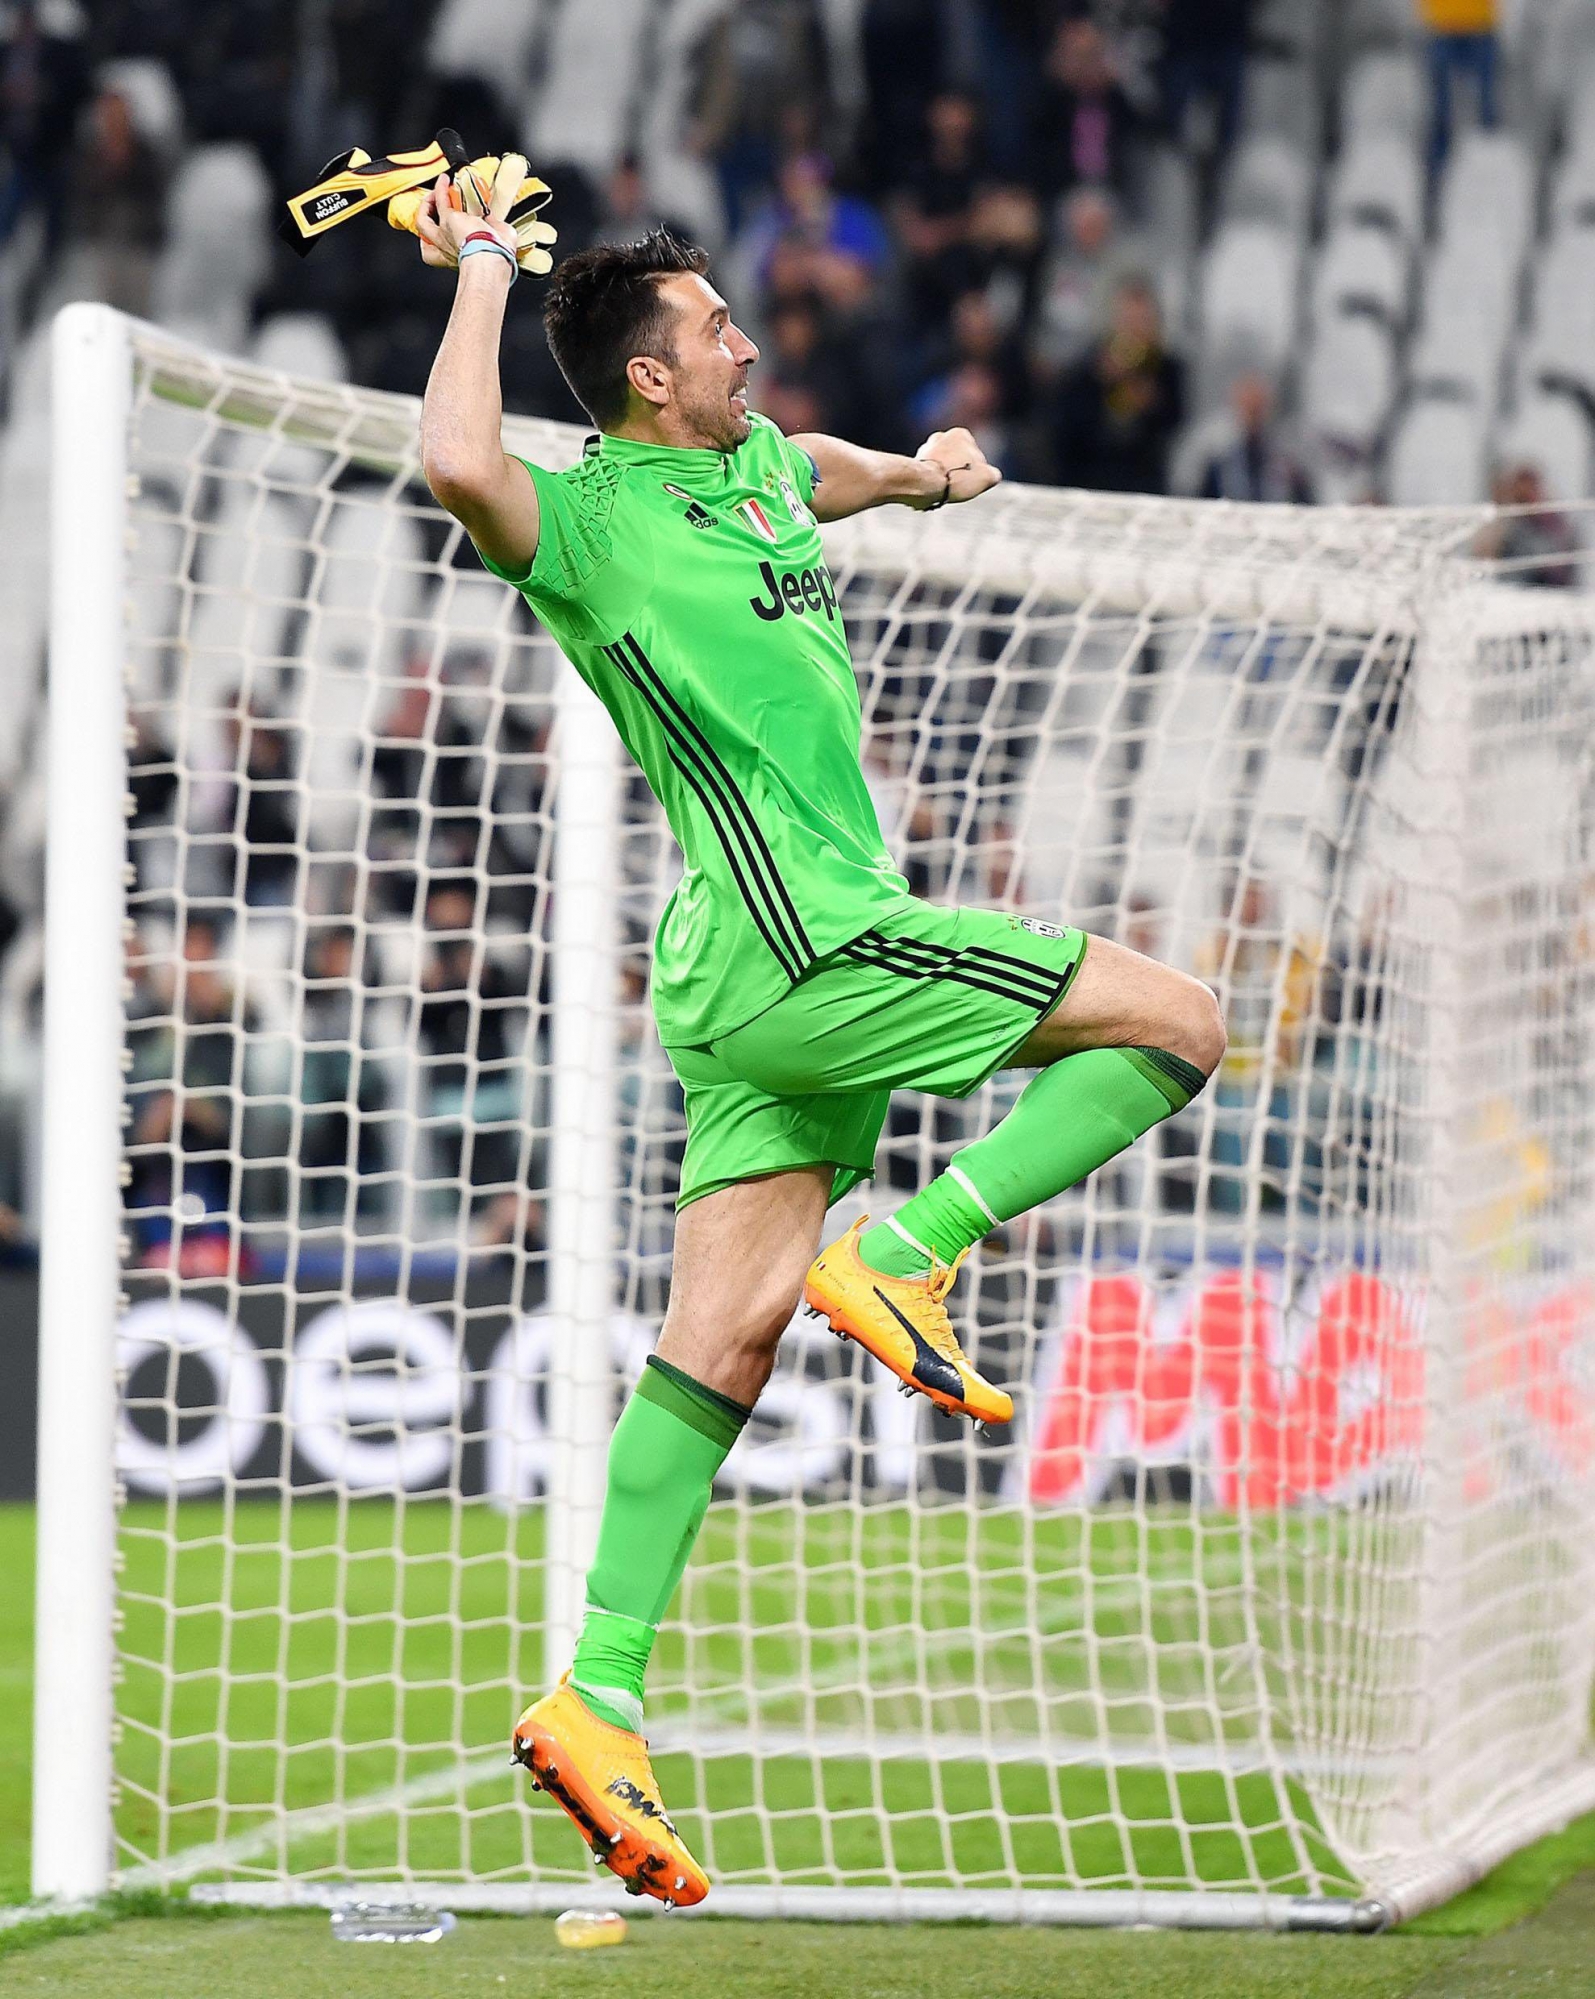 epa05953642 Juventus' goalkeeper Gianluigi Buffon celebrates the victory at the end of the UEFA Champions League semifinal second leg soccer match Juventus FC vs AS Monaco at the Juventus Stadium in Turin, Italy, 09 May 2017.  EPA/ALESSANDRO  DI MARCO ITALY SOCCER UEFA CHAMPIONS LEAGUE